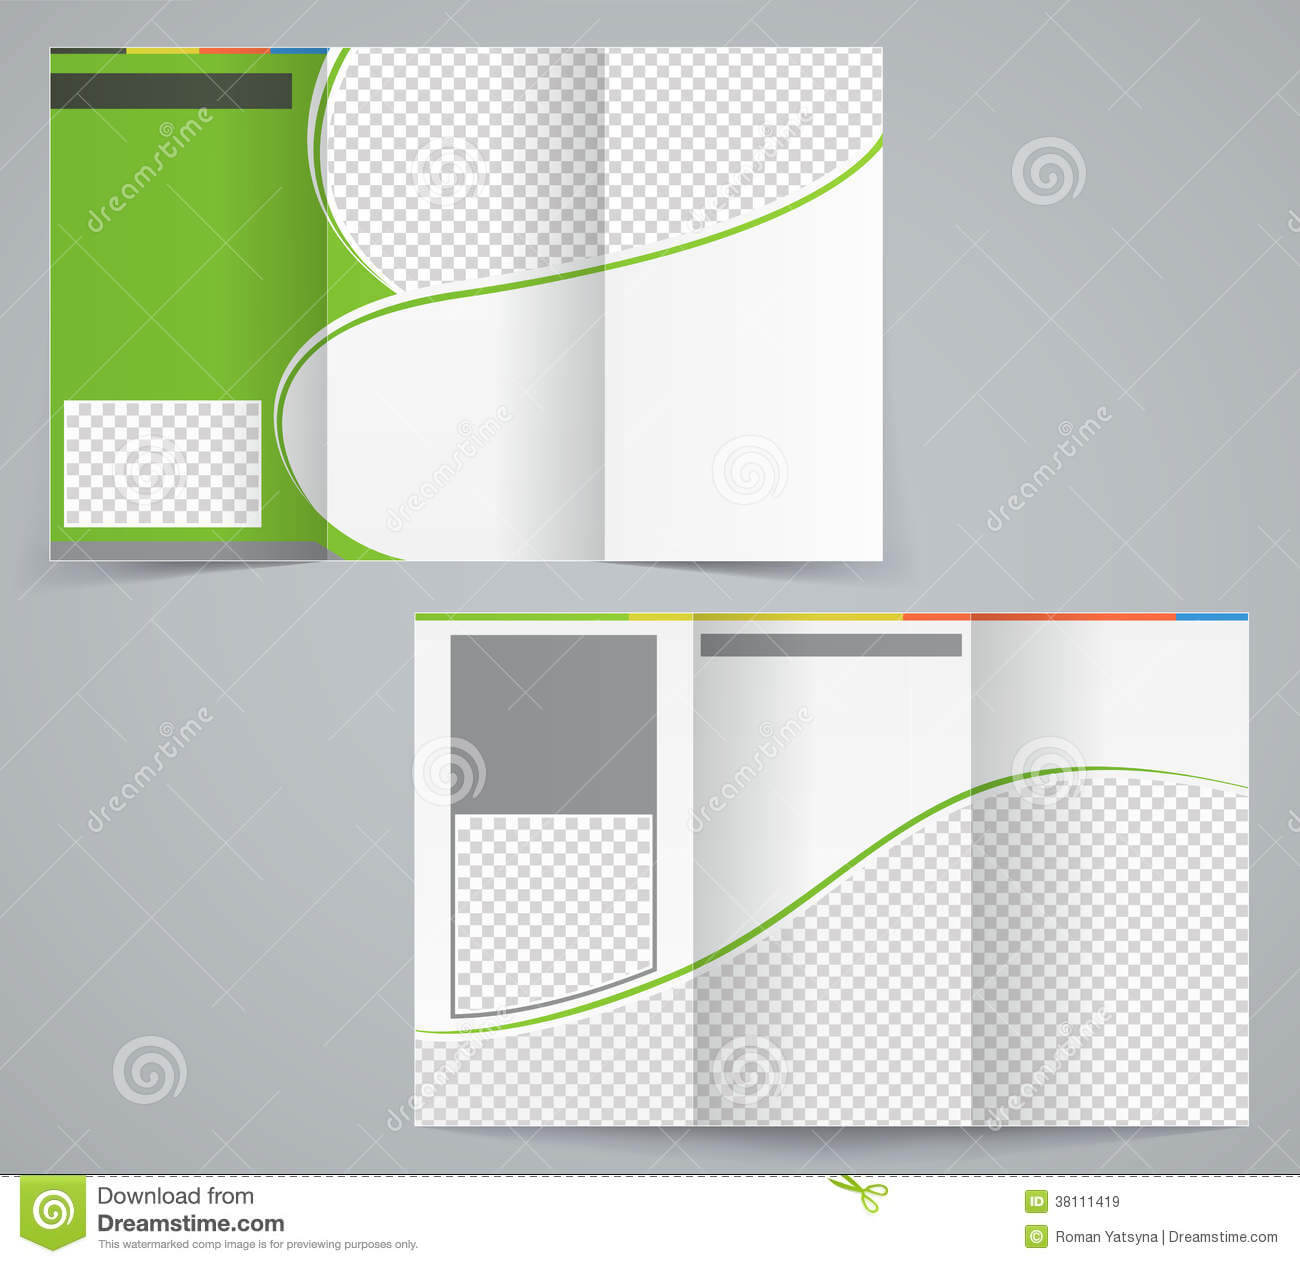 Tri Fold Business Brochure Template, Vector Green Stock With Regard To 3 Fold Brochure Template Free Download